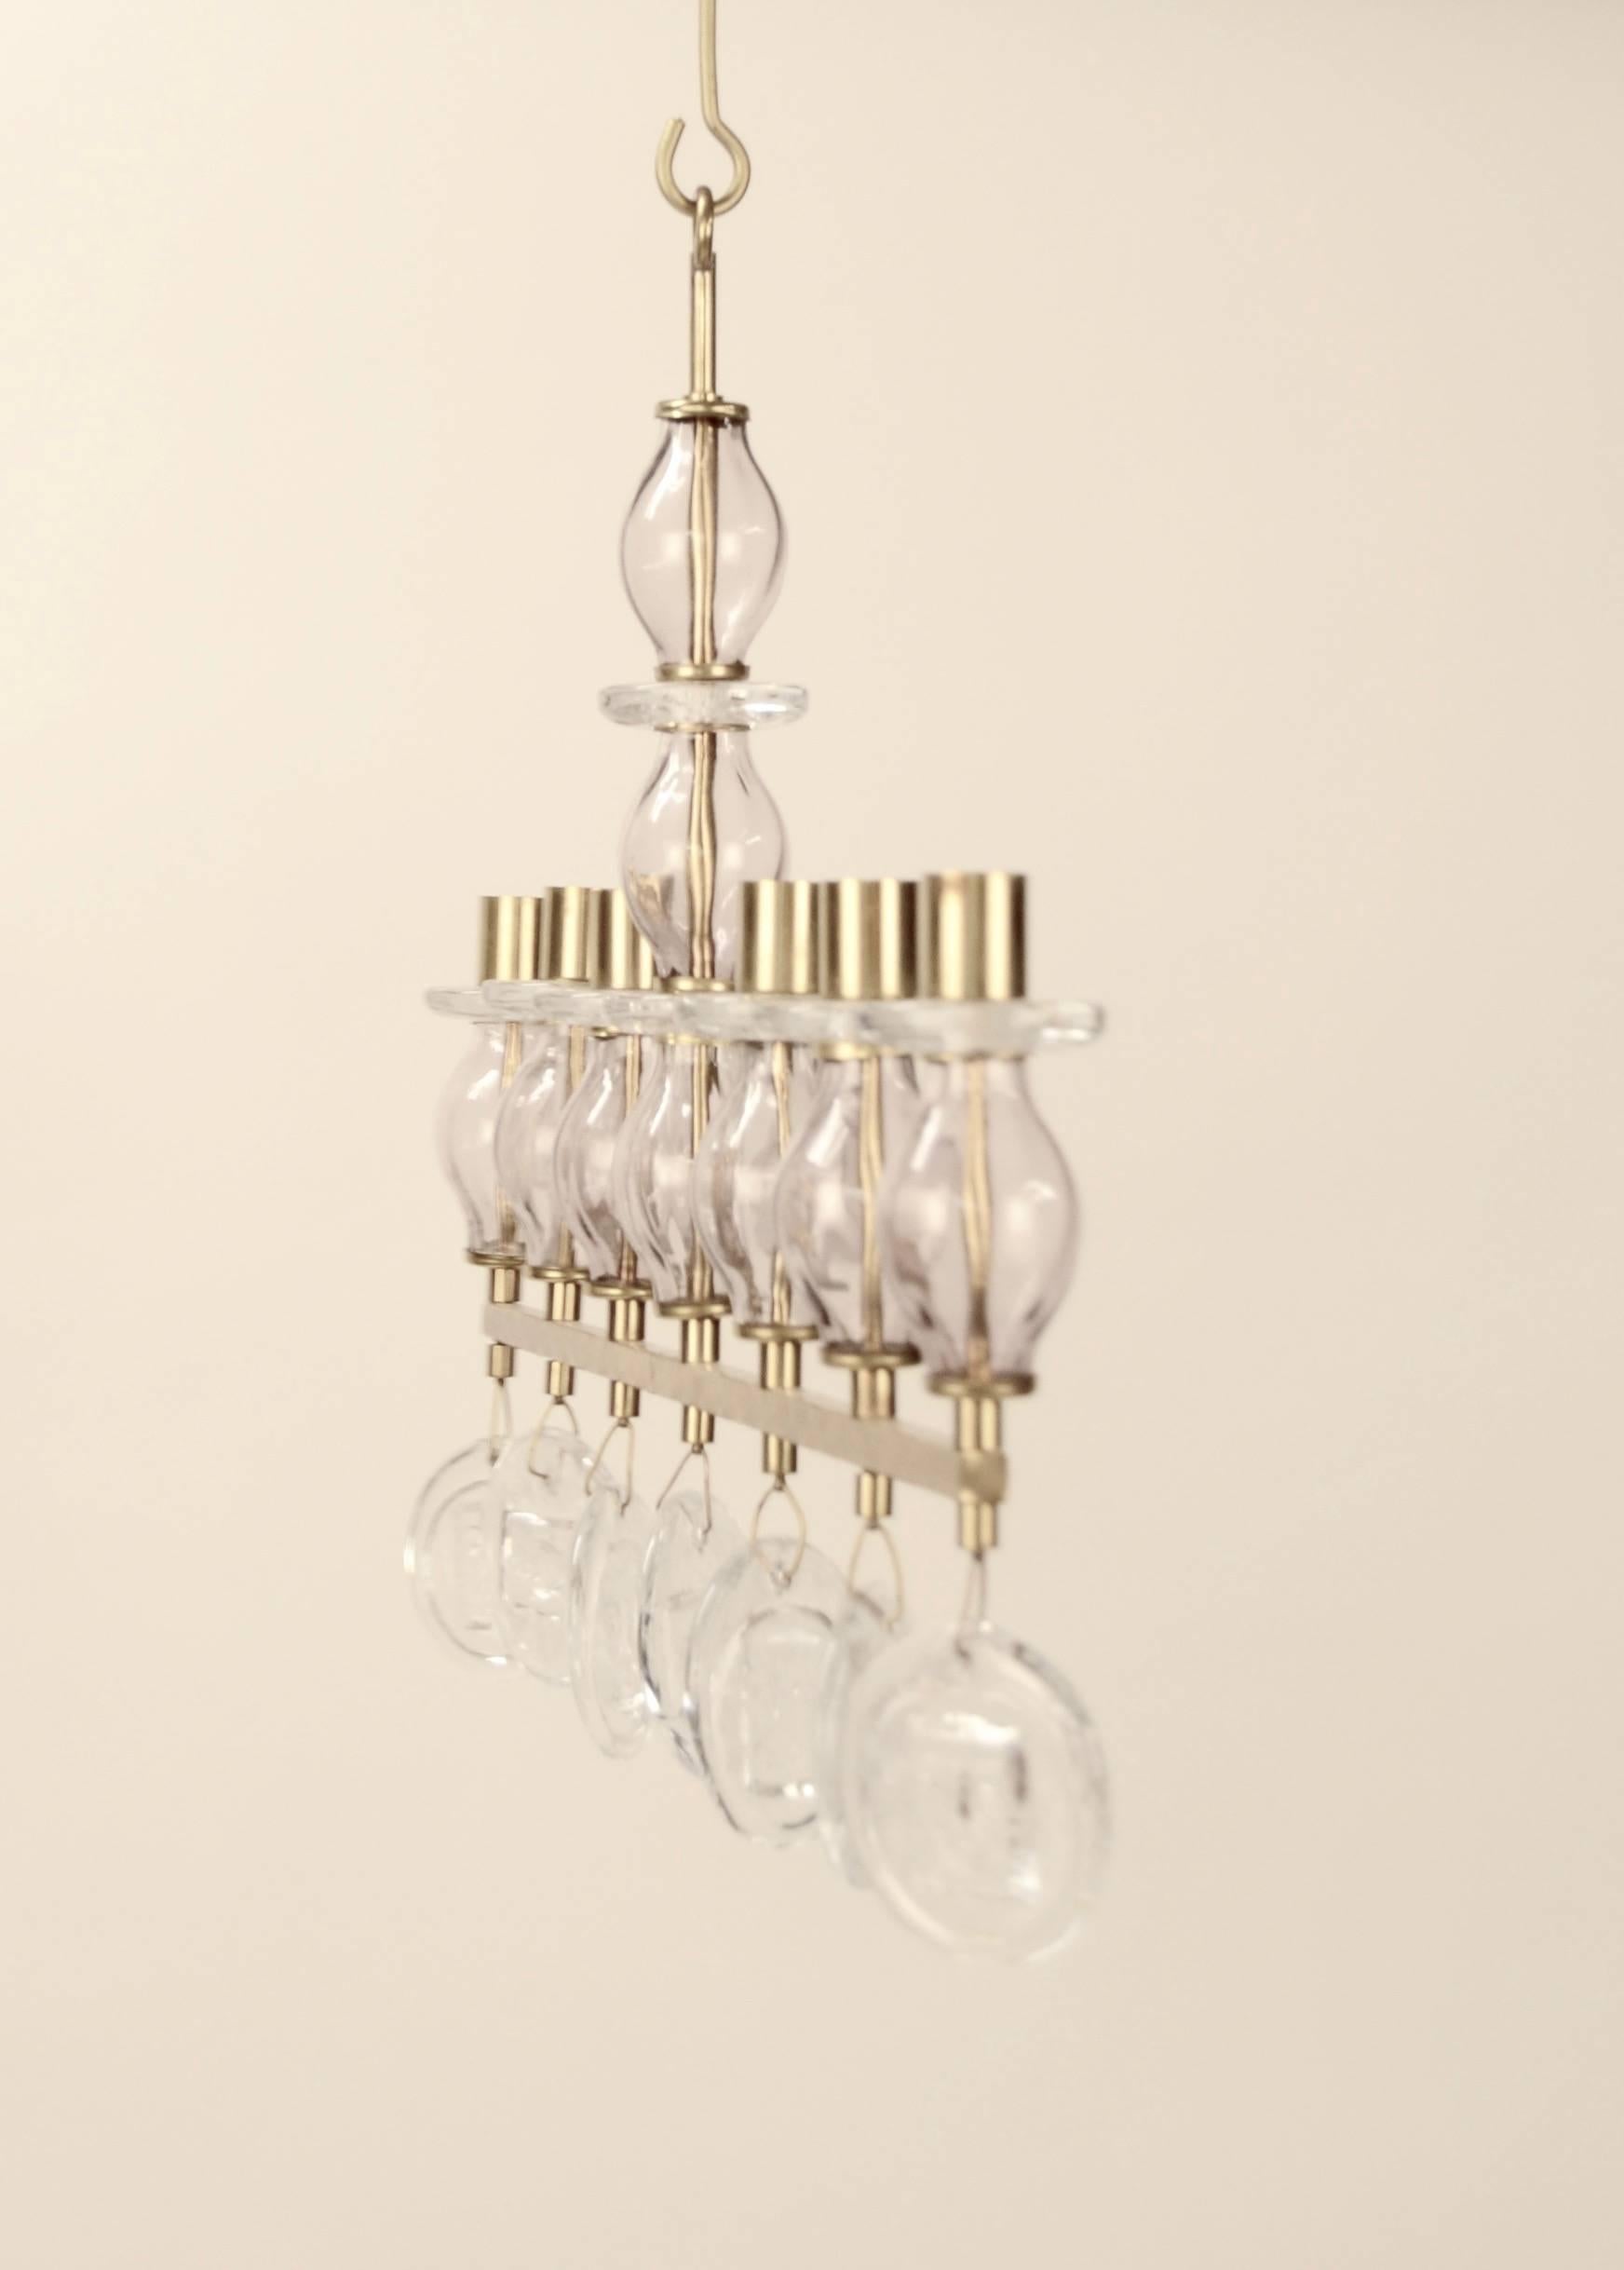 Large twelve-armed candlelit chandelier, designed by Erik Hoglund for Boda Smide. With art glass pendants, late 20th century.